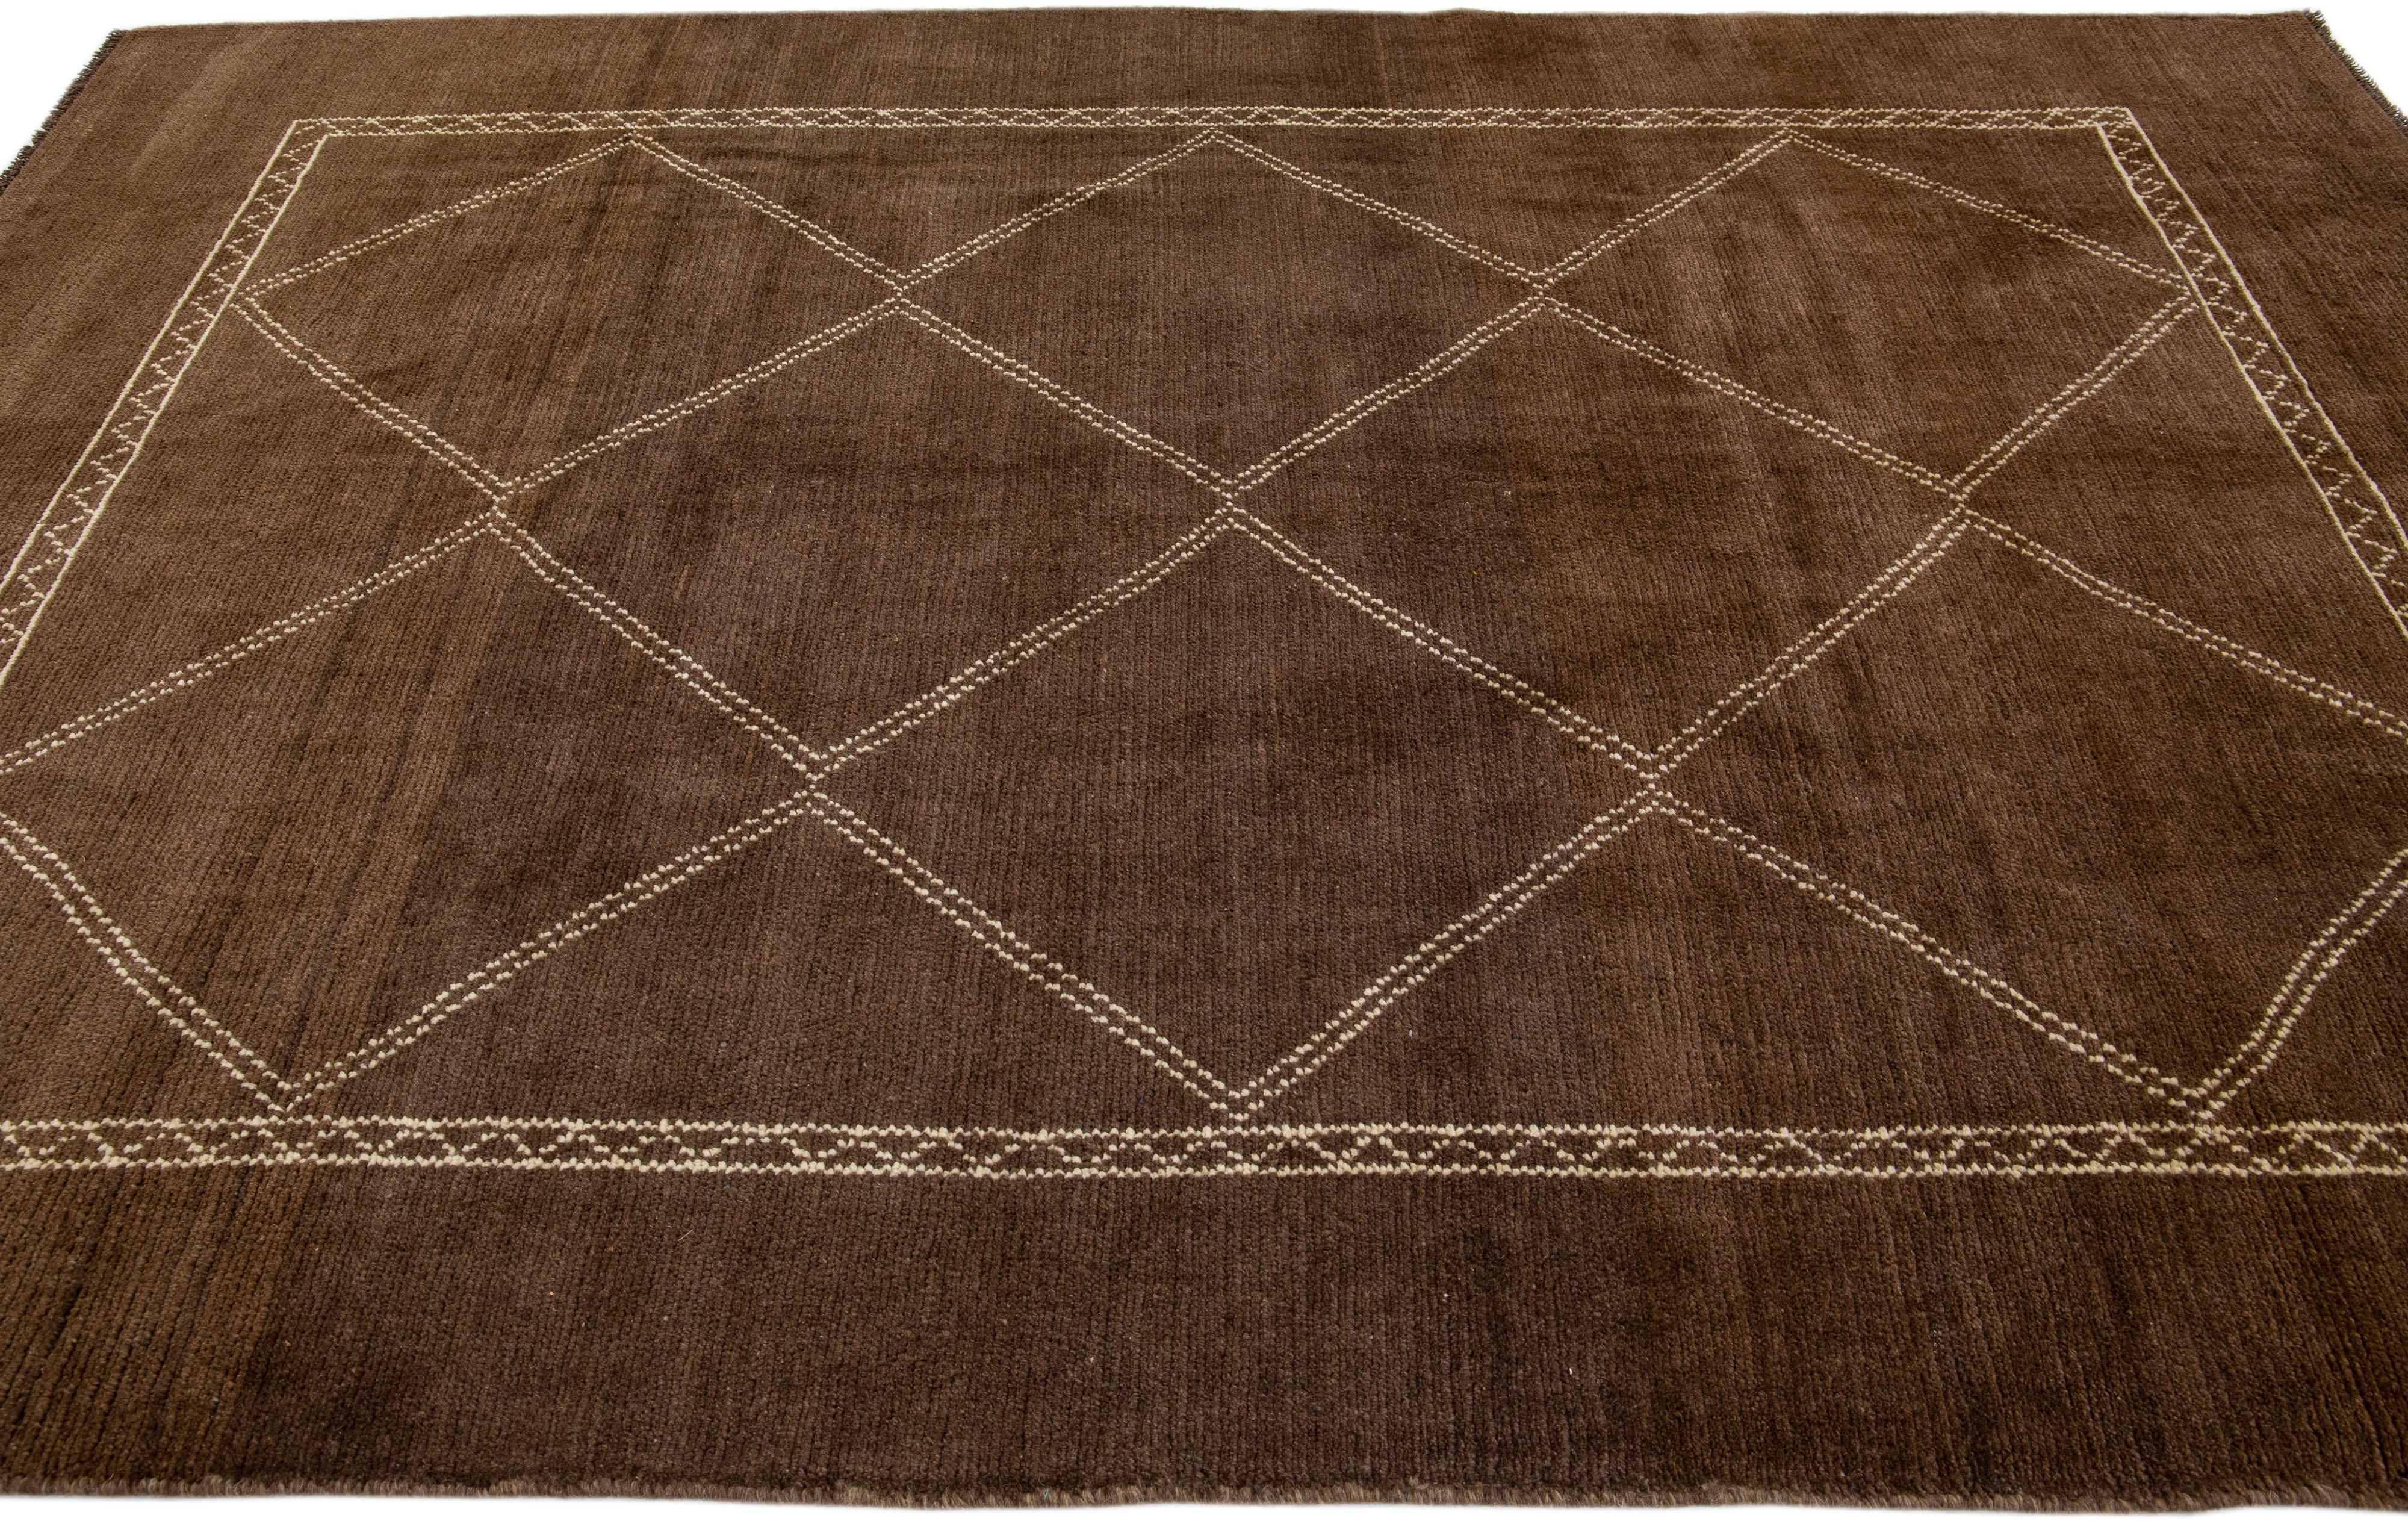 Modern Moroccan Style Brown Handmade Tribal Wool Rug by Apadana In New Condition For Sale In Norwalk, CT